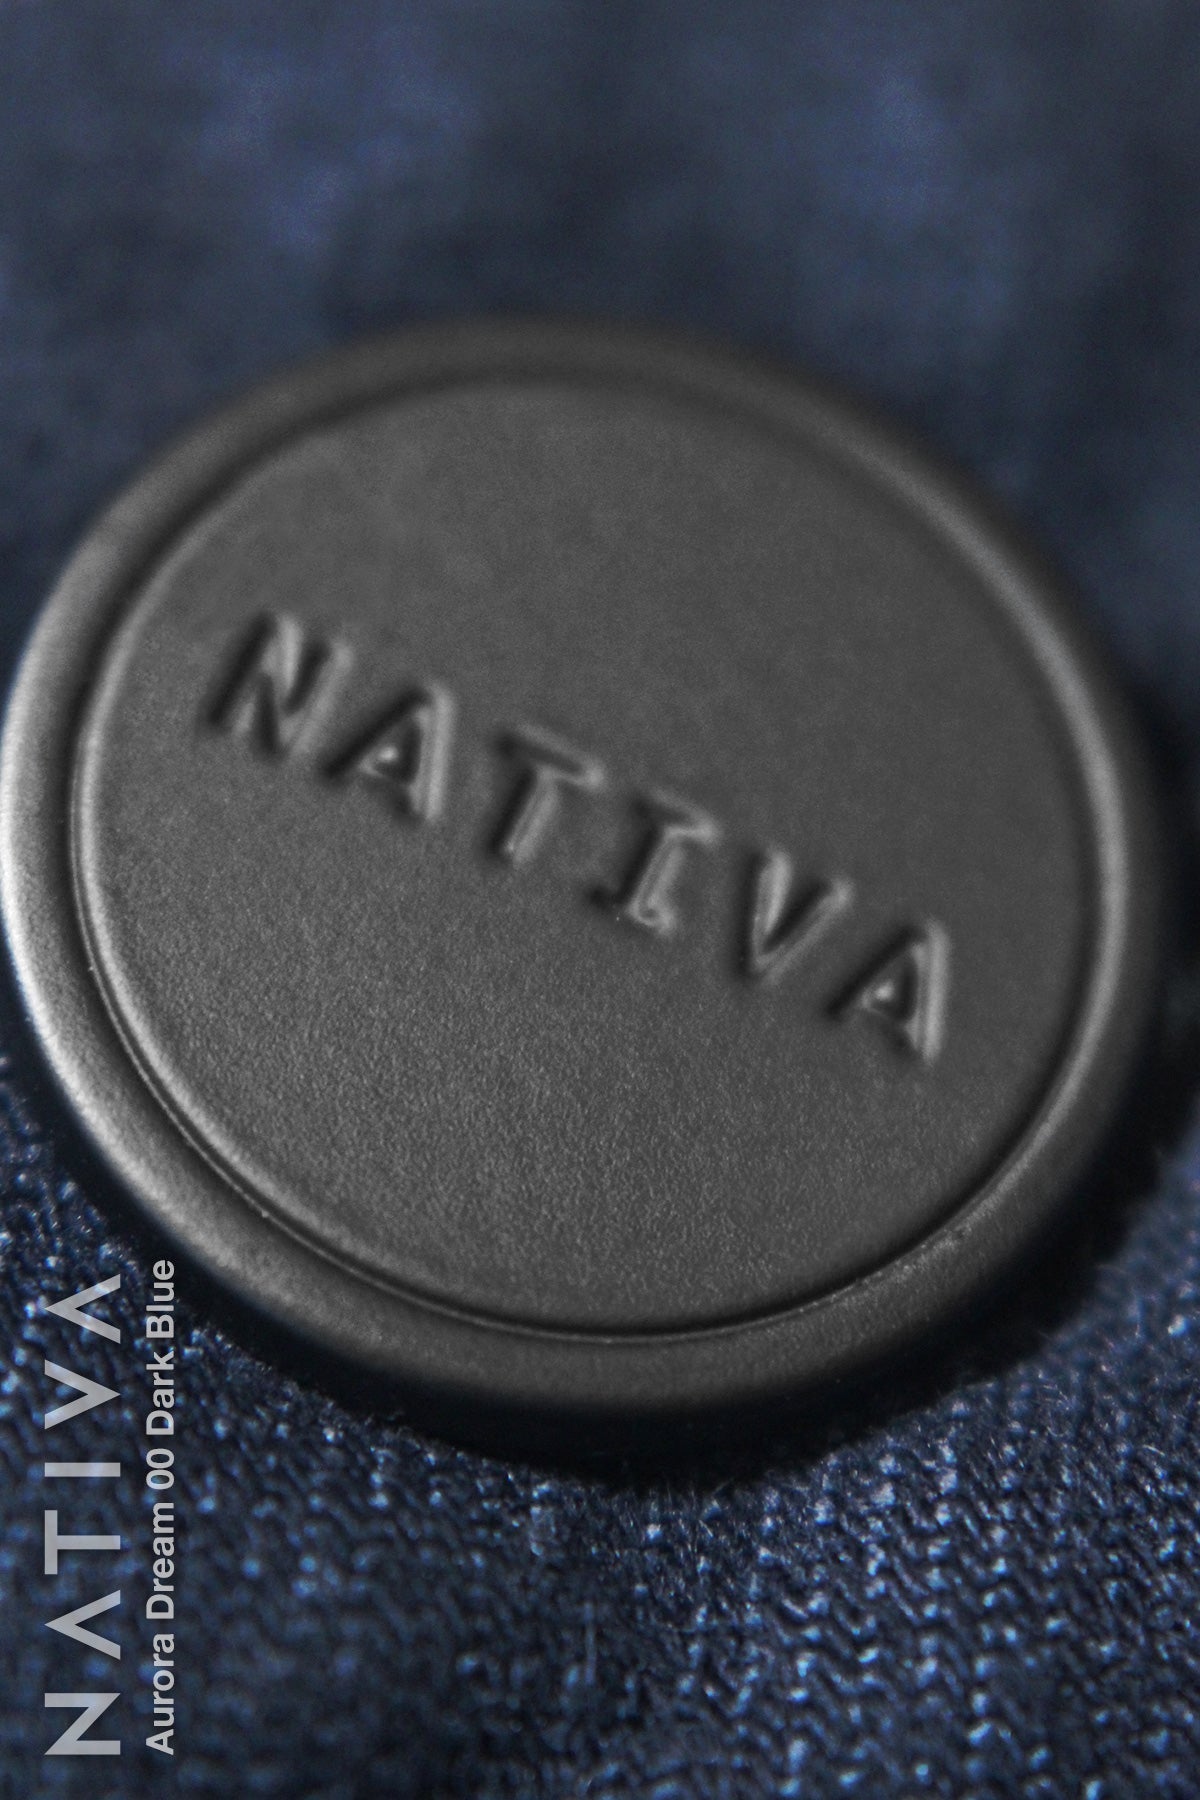 NATIVA, STRETCH JEANS. AURORA DREAM 00 DARK BLUE, High Shaping Capacity,  Ultra Comfy, 24-Hour Wear, Mid-Waisted Super Skinny Jeans